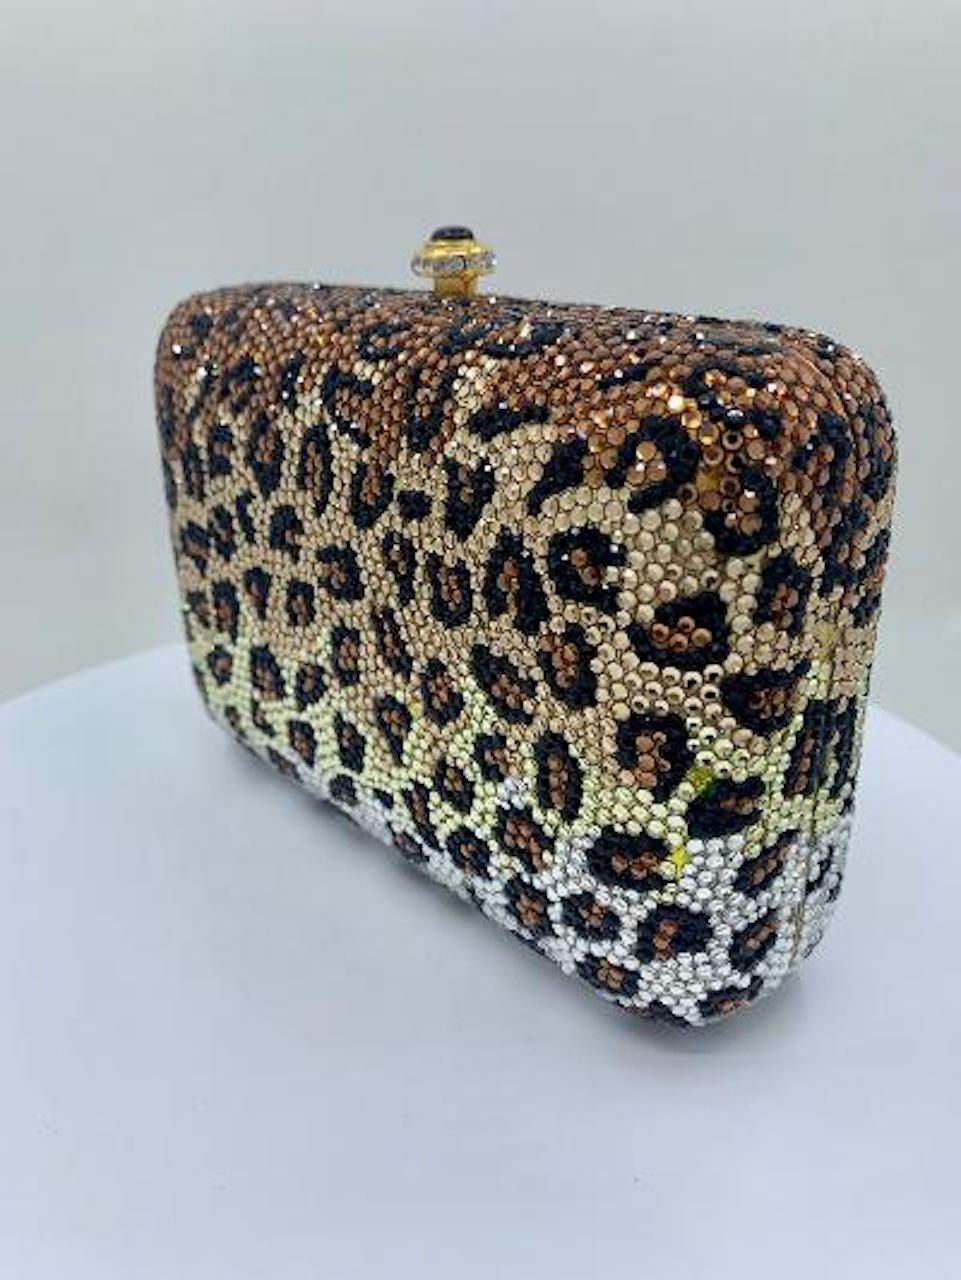 Exquisite handmade designer, Kathrine Baumann, who is the celebrated handbag maker to the stars, leopard pattern pillow shaped minaudière, evening bag or evening clutch is completely covered in fine quality Swarovski crystals. Gold toned metal frame